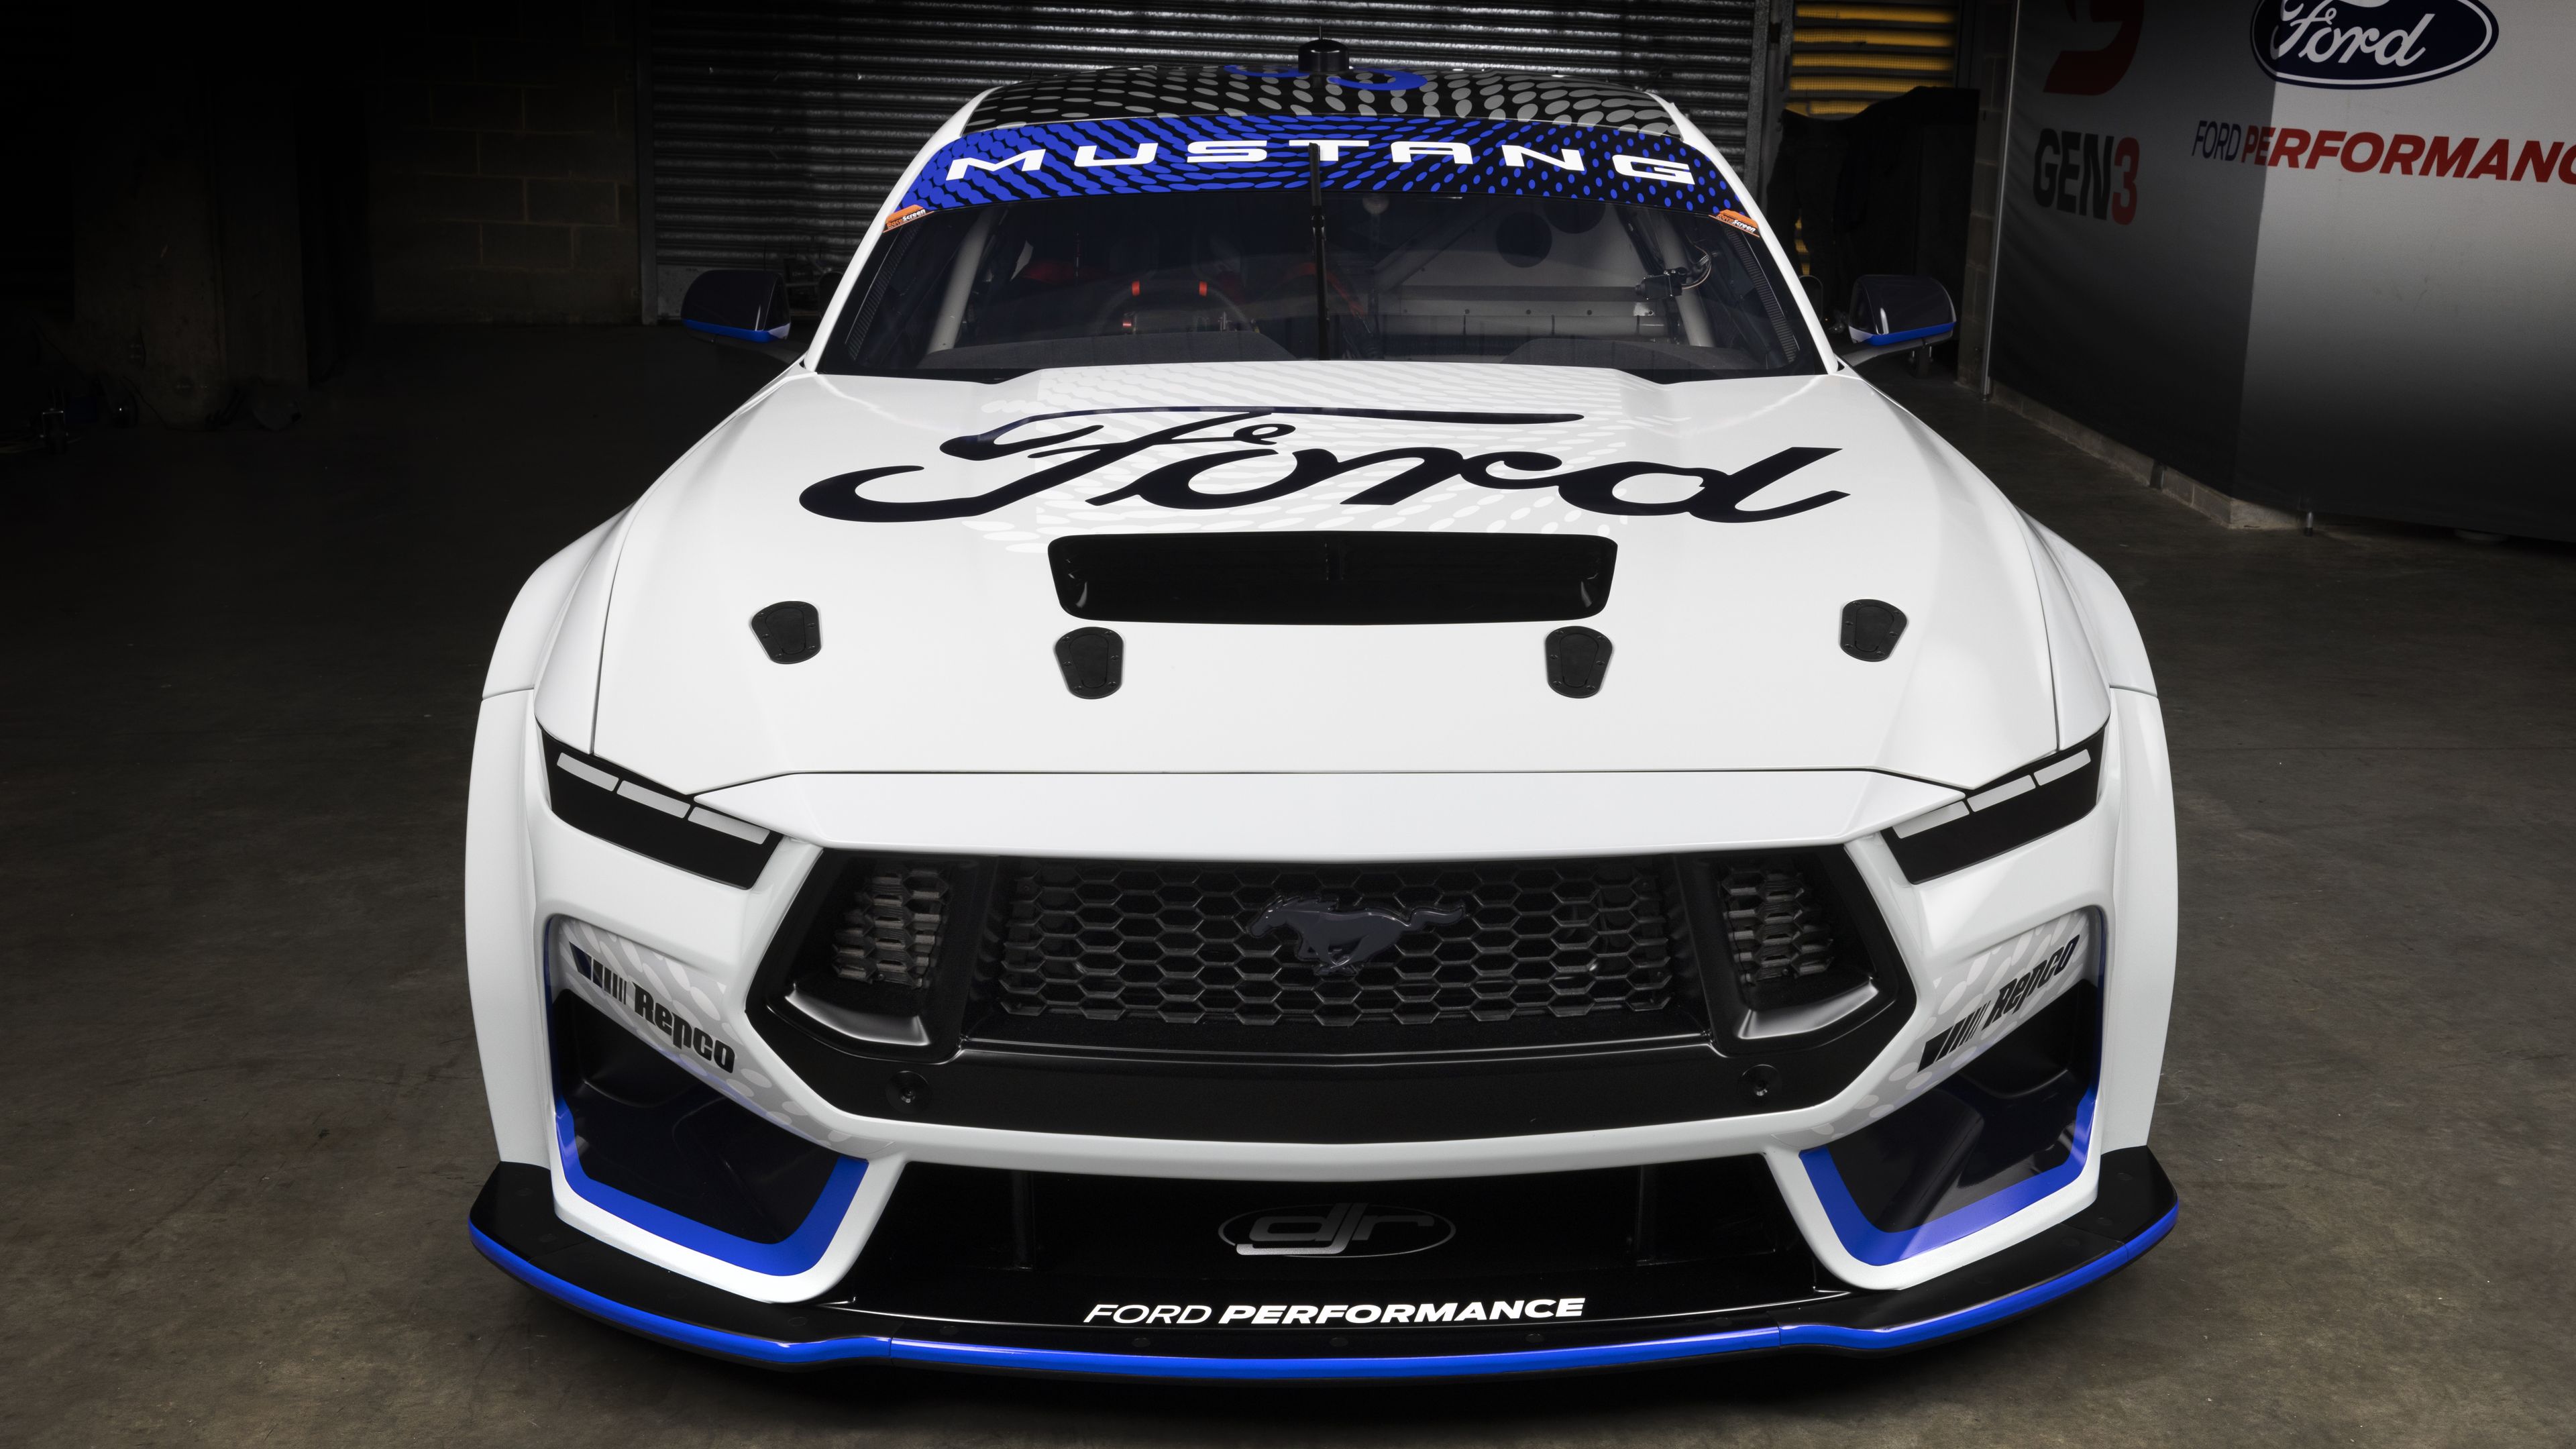 Dick Johnson takes covers new Gen3 Ford Mustang for taking a lap of Mount Panorama